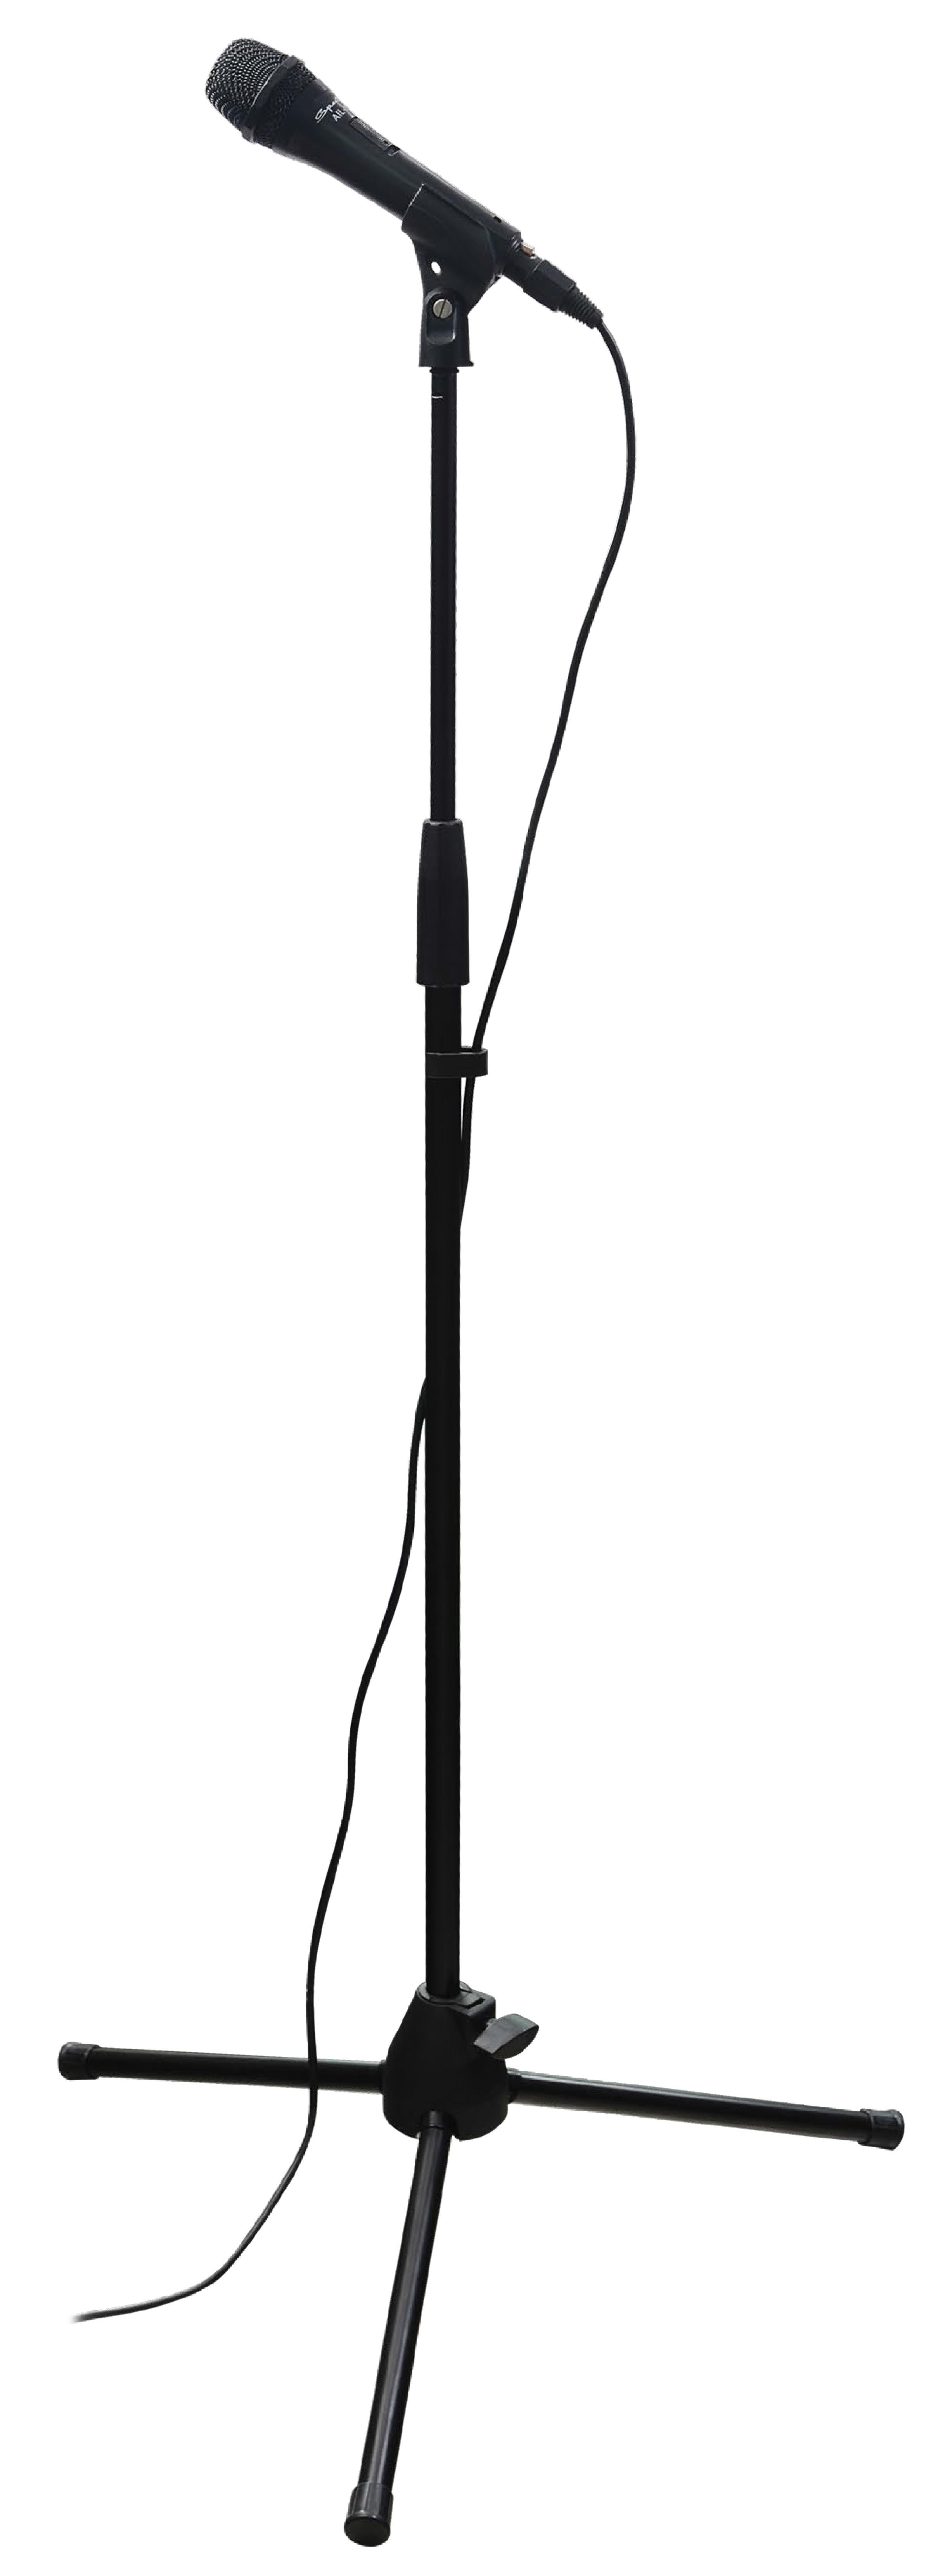 Microphone stand clipart - Clipground